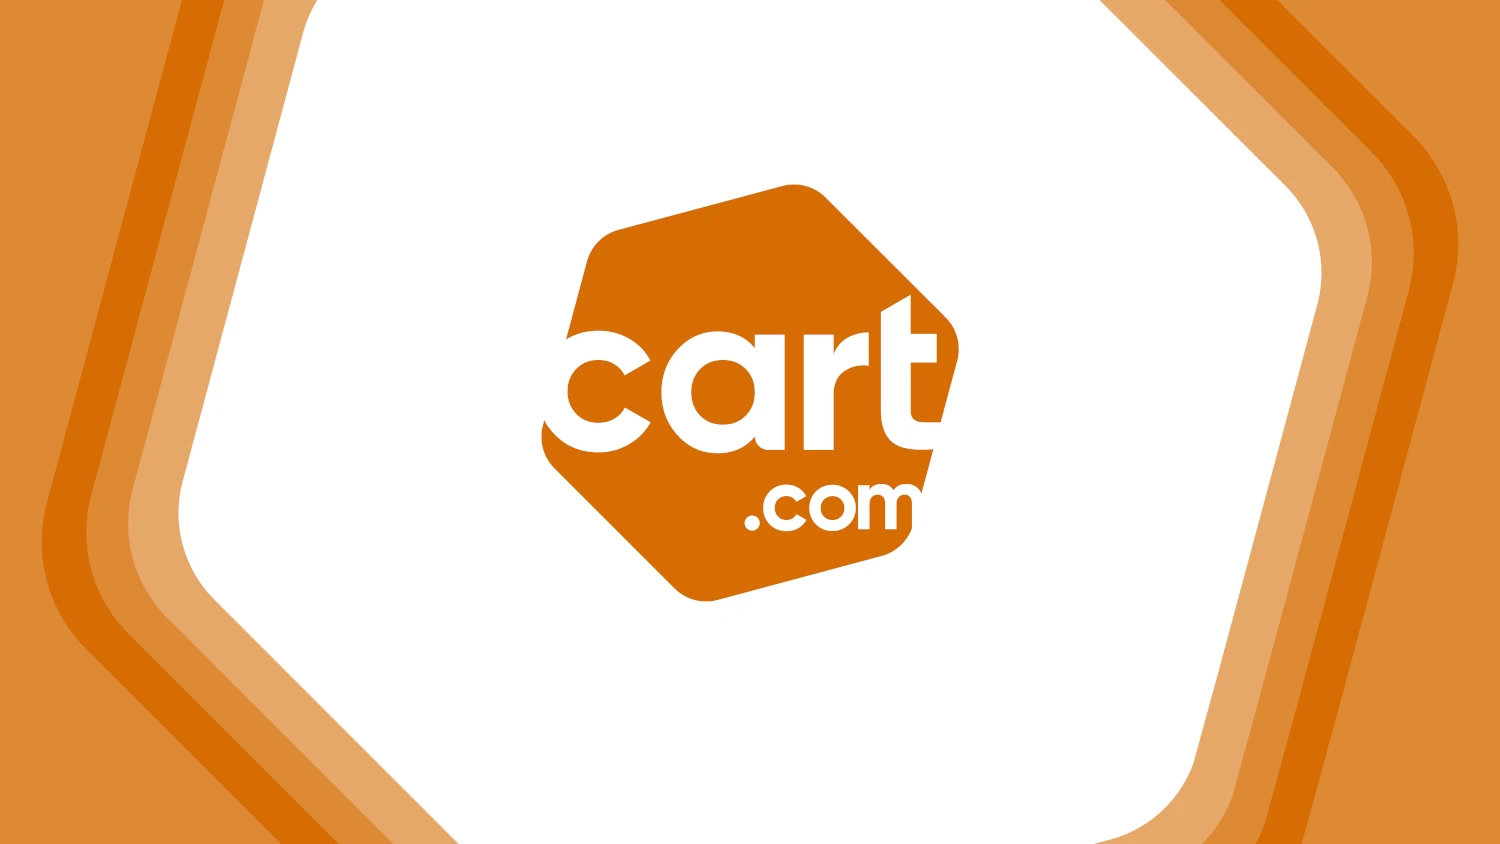 Cart.com Launches Cart Channels Enabling Brands to Unify Feed Marketing and Marketplace Management, Increase Sales and Simplify Operations